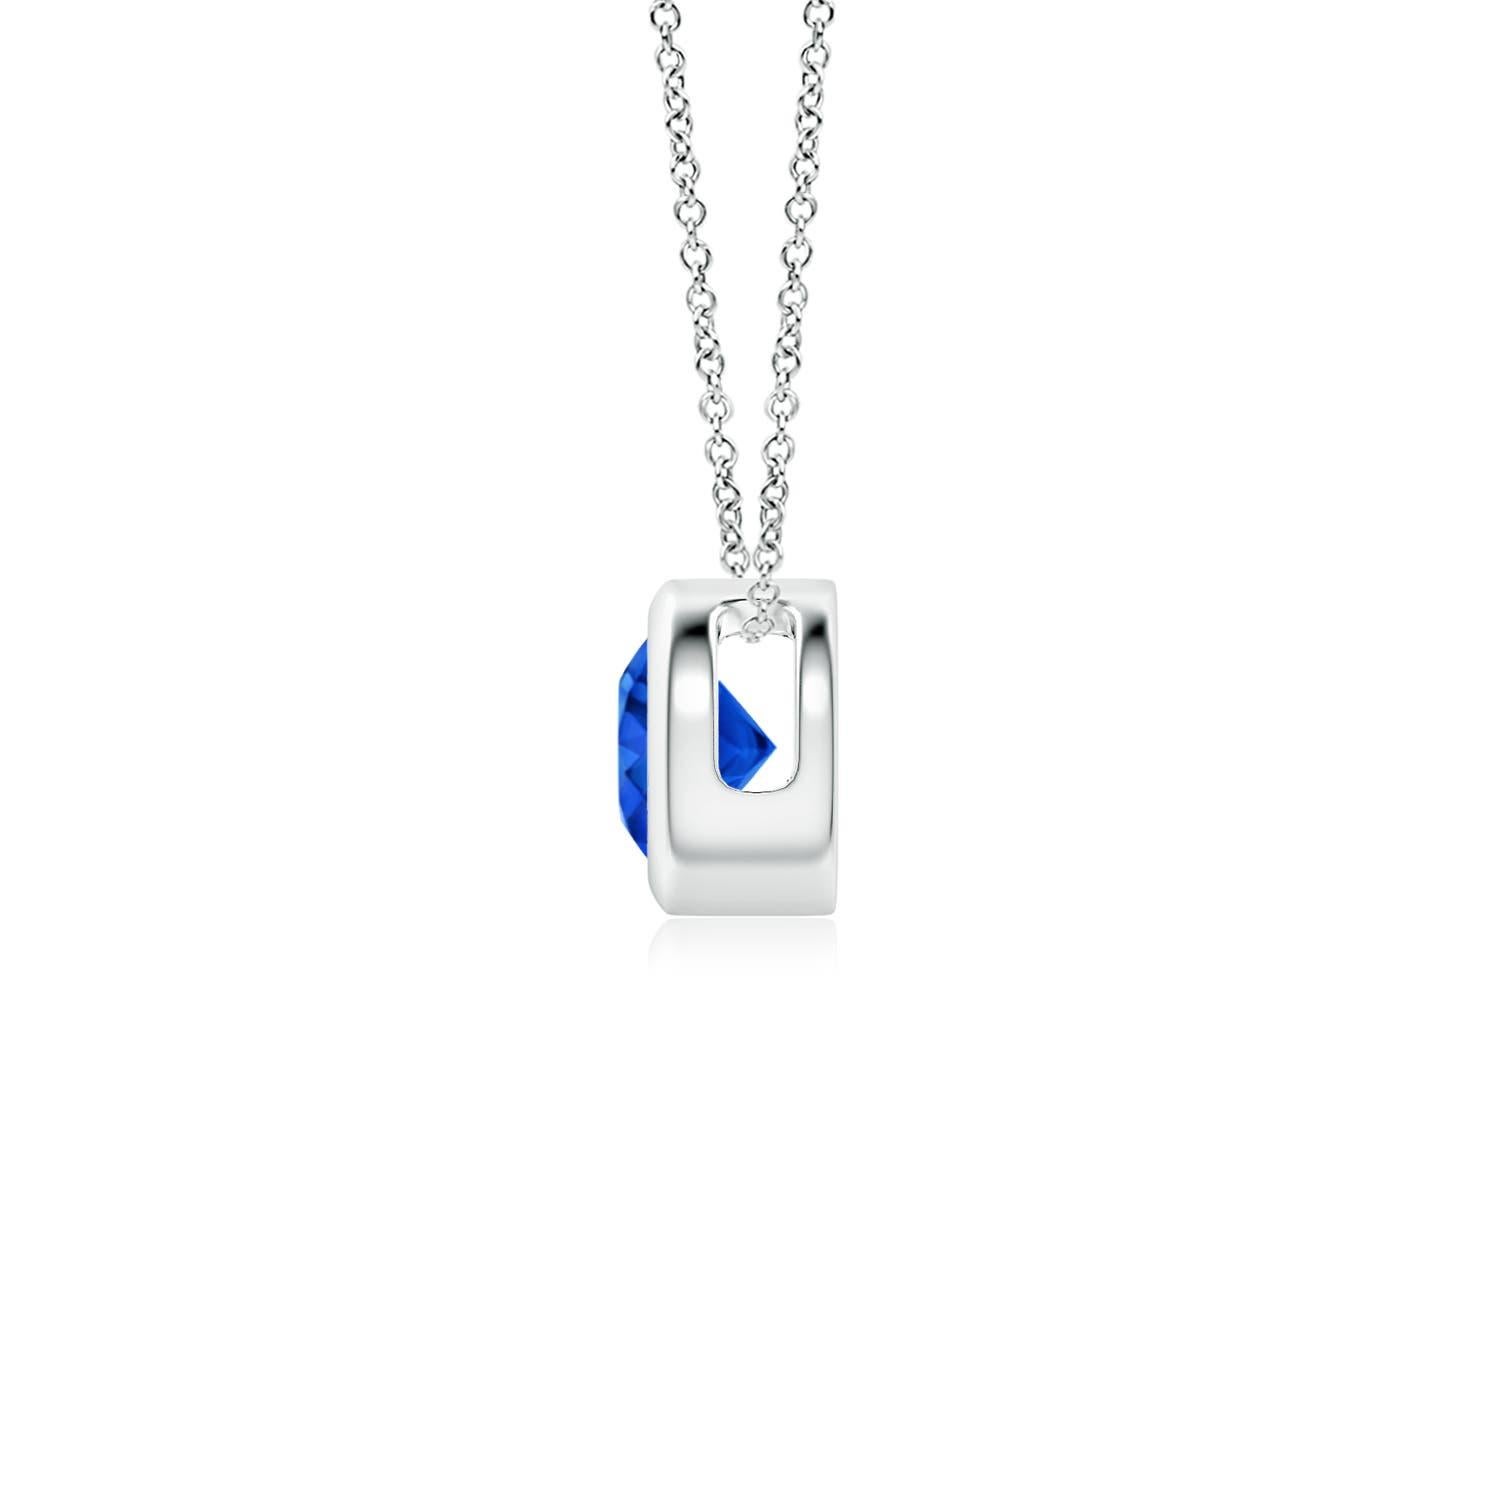 This classic solitaire sapphire pendant's beautiful design makes the center stone appear like it's floating on the chain. The radiant blue gem is secured in a bezel setting. Crafted in platinum, this round sapphire pendant is simple yet